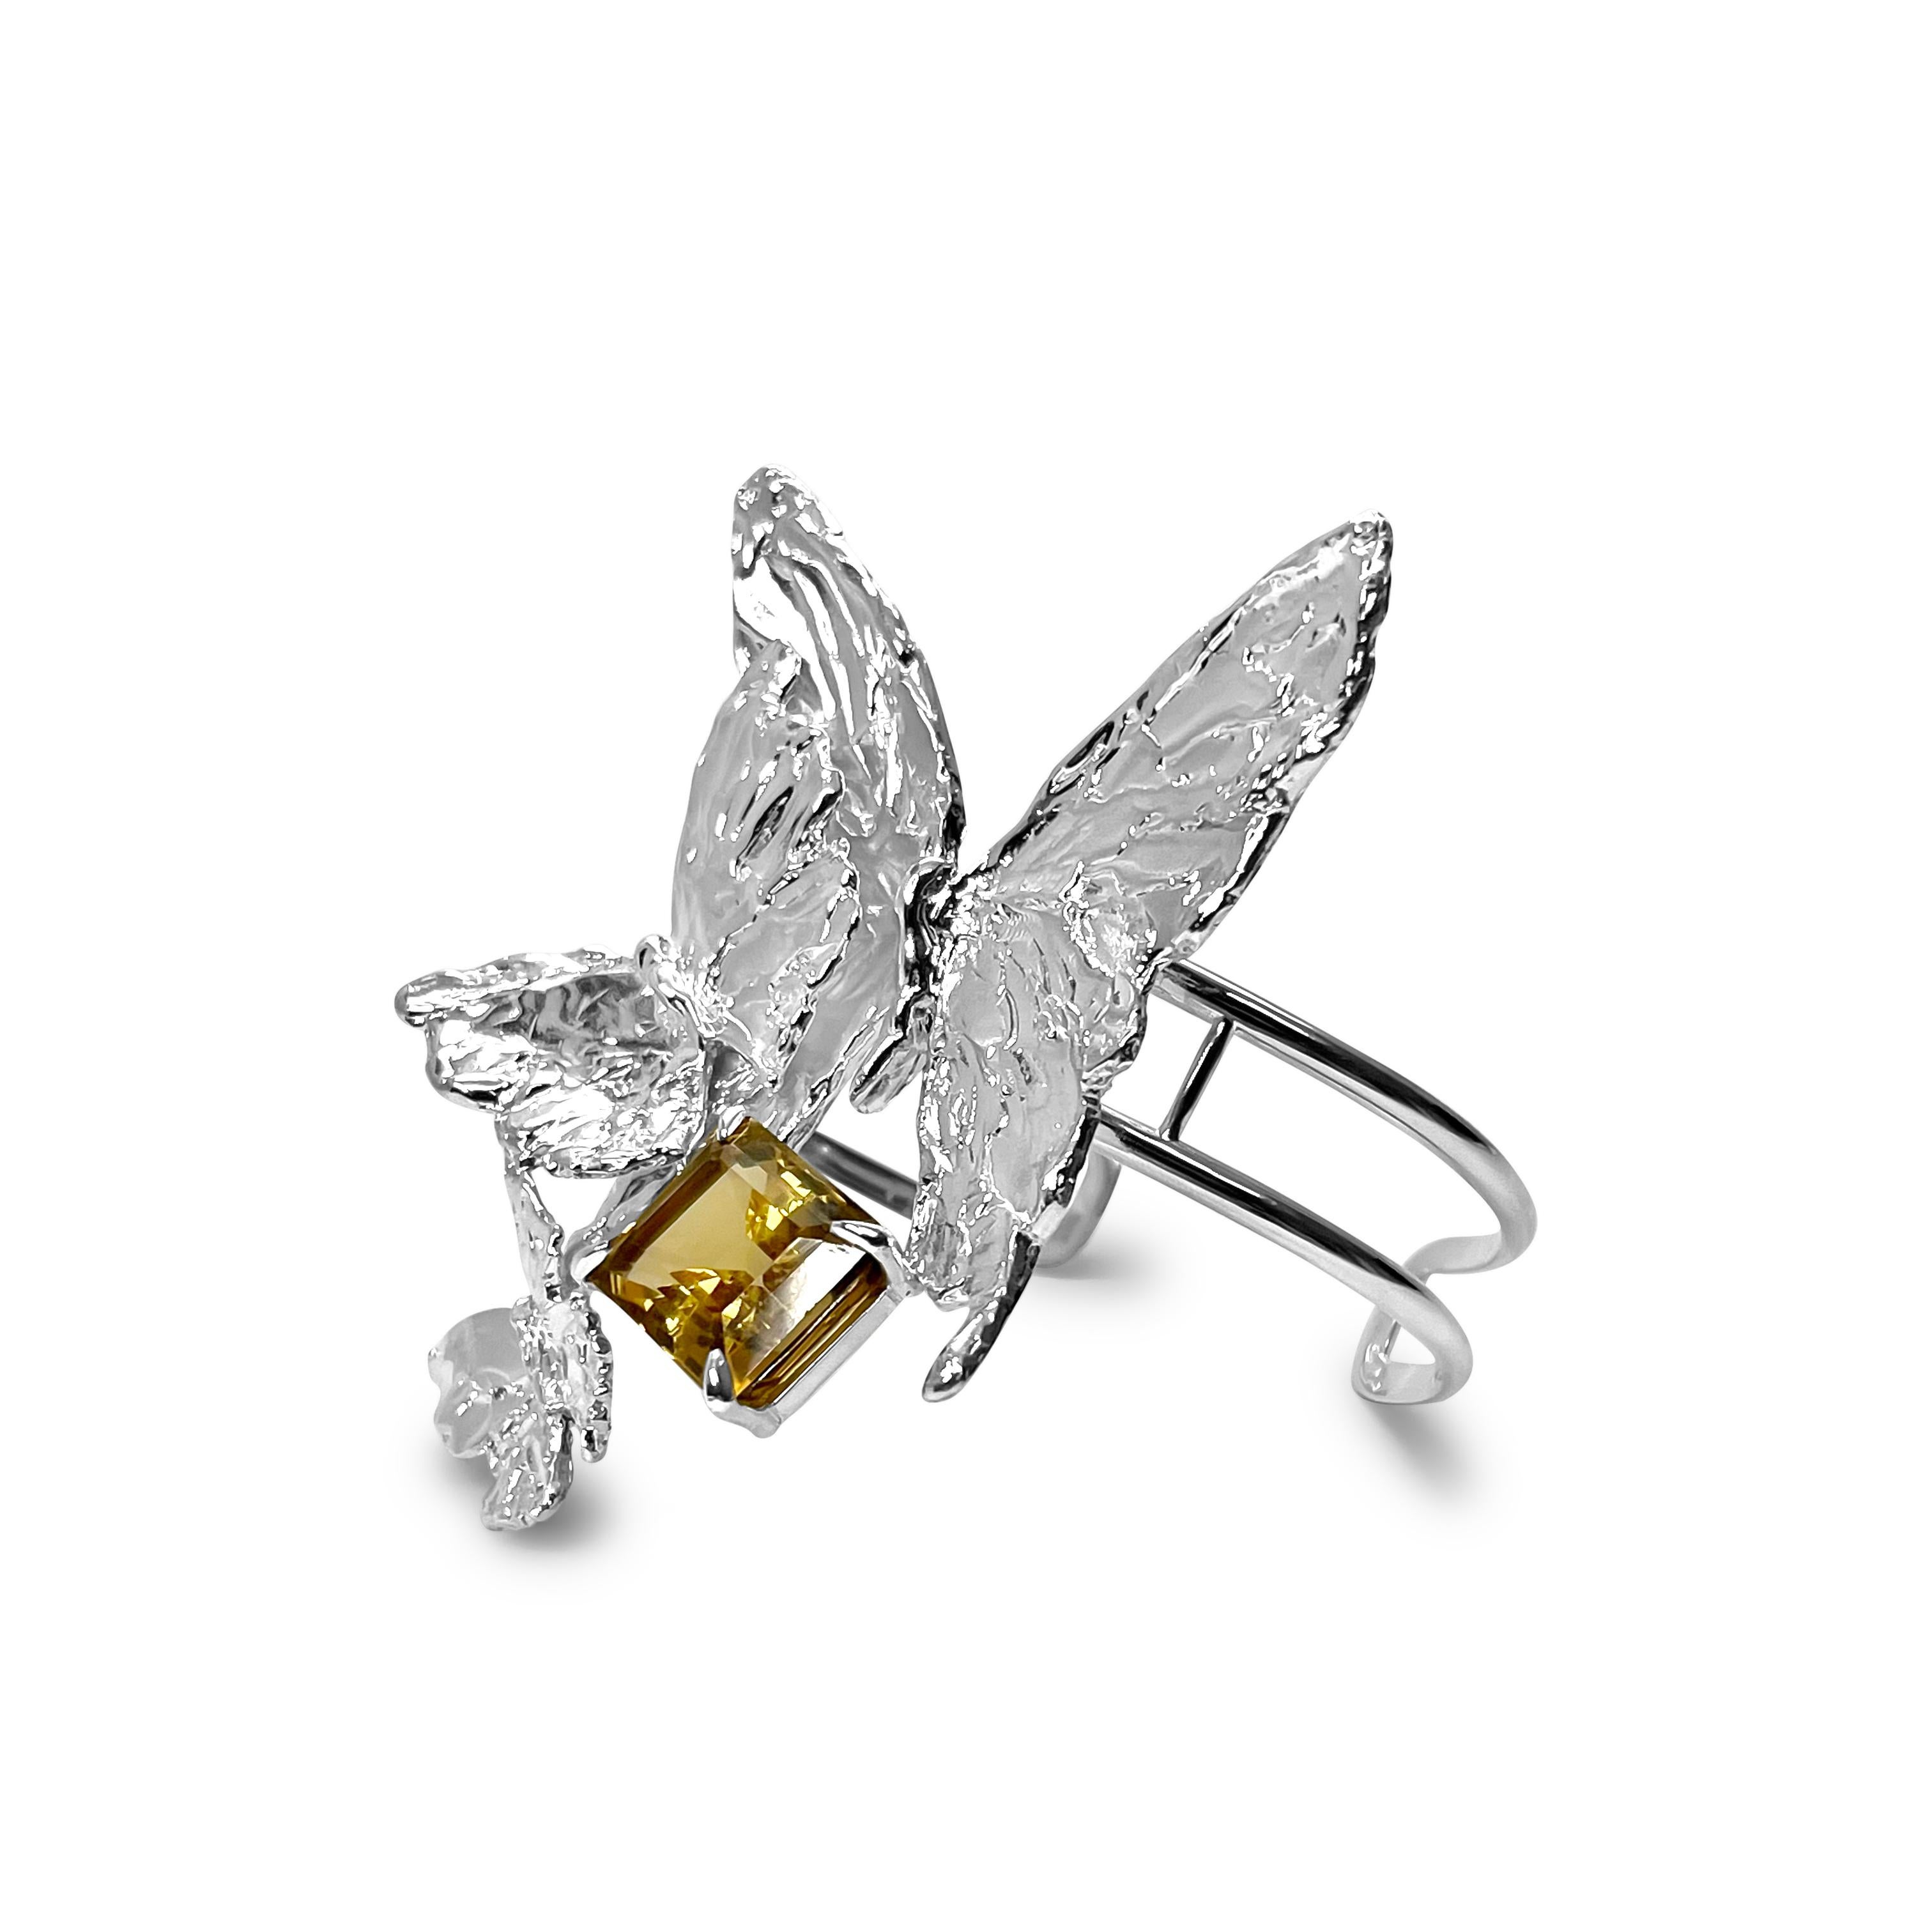 Intention: Sheer drama... the good kind!

Design: A trio of butterflies surround an emerald cut citrine in this stunning cuff. Embodying the intention of our BELIEVE collection, this piece demands that you think big and bold(ly)!

Style Suggestions: